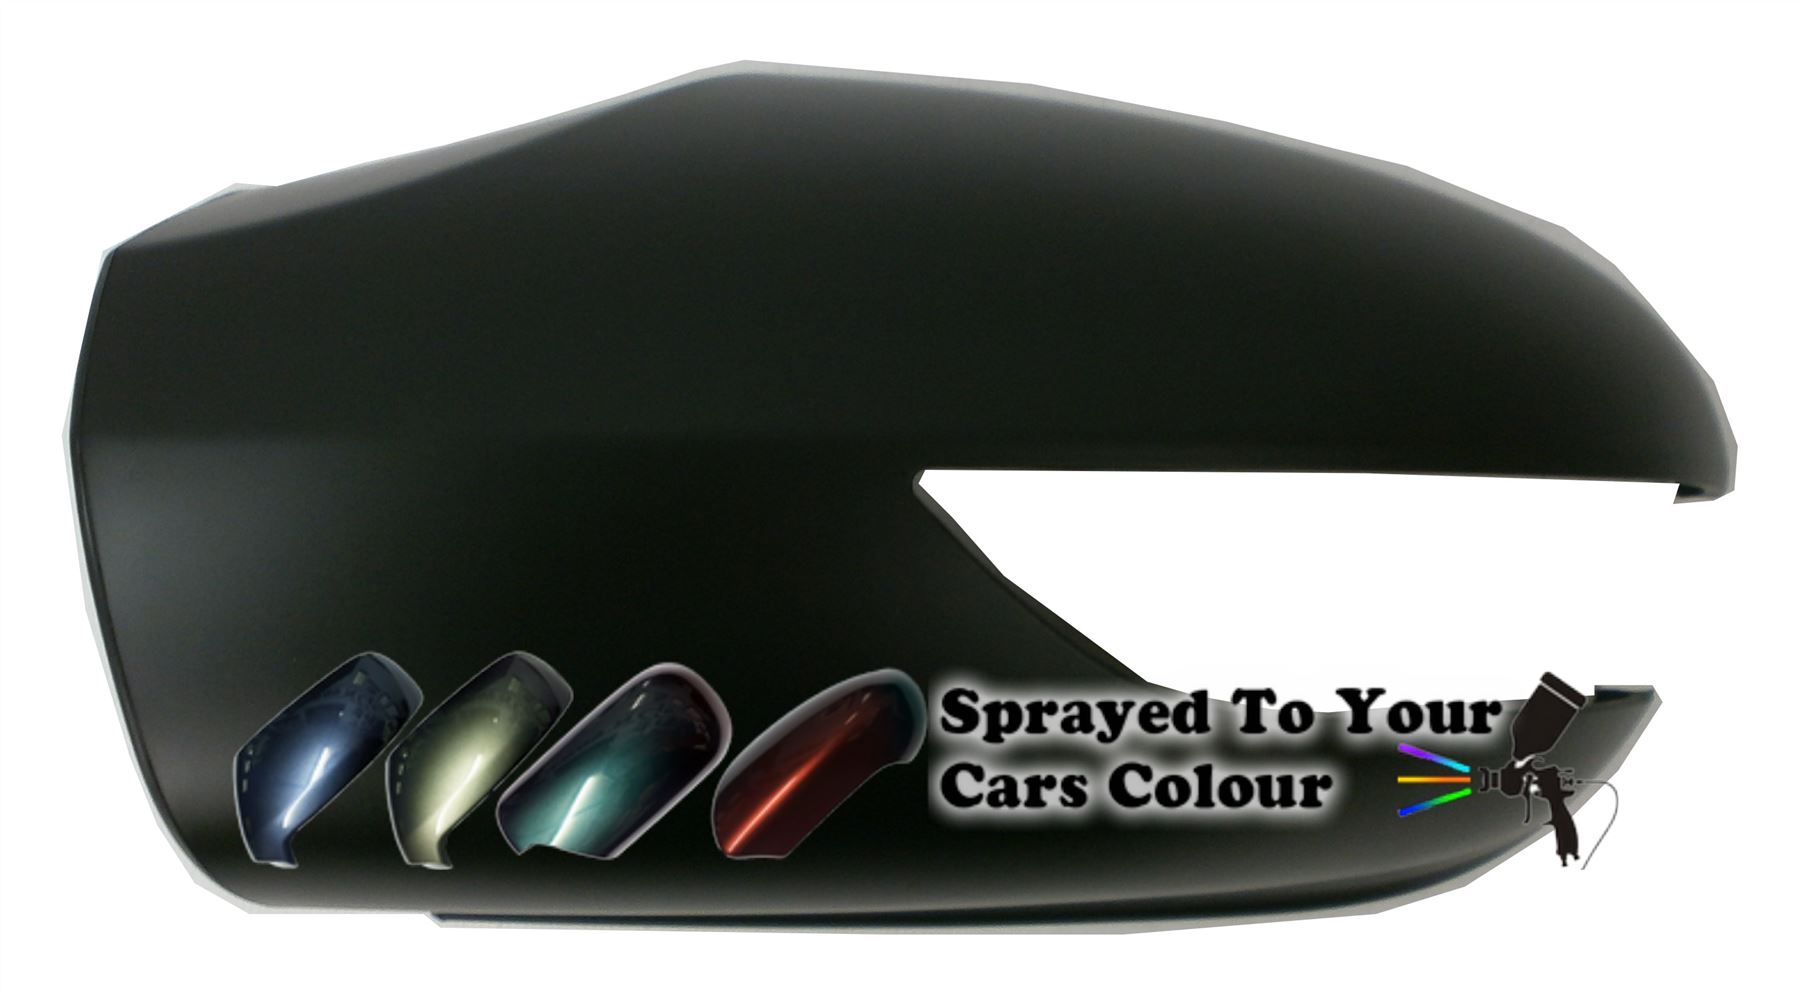 Mercedes Benz A Class (W169) 2/2005-9/2008 Wing Mirror Cover Passenger Side N/S Painted Sprayed